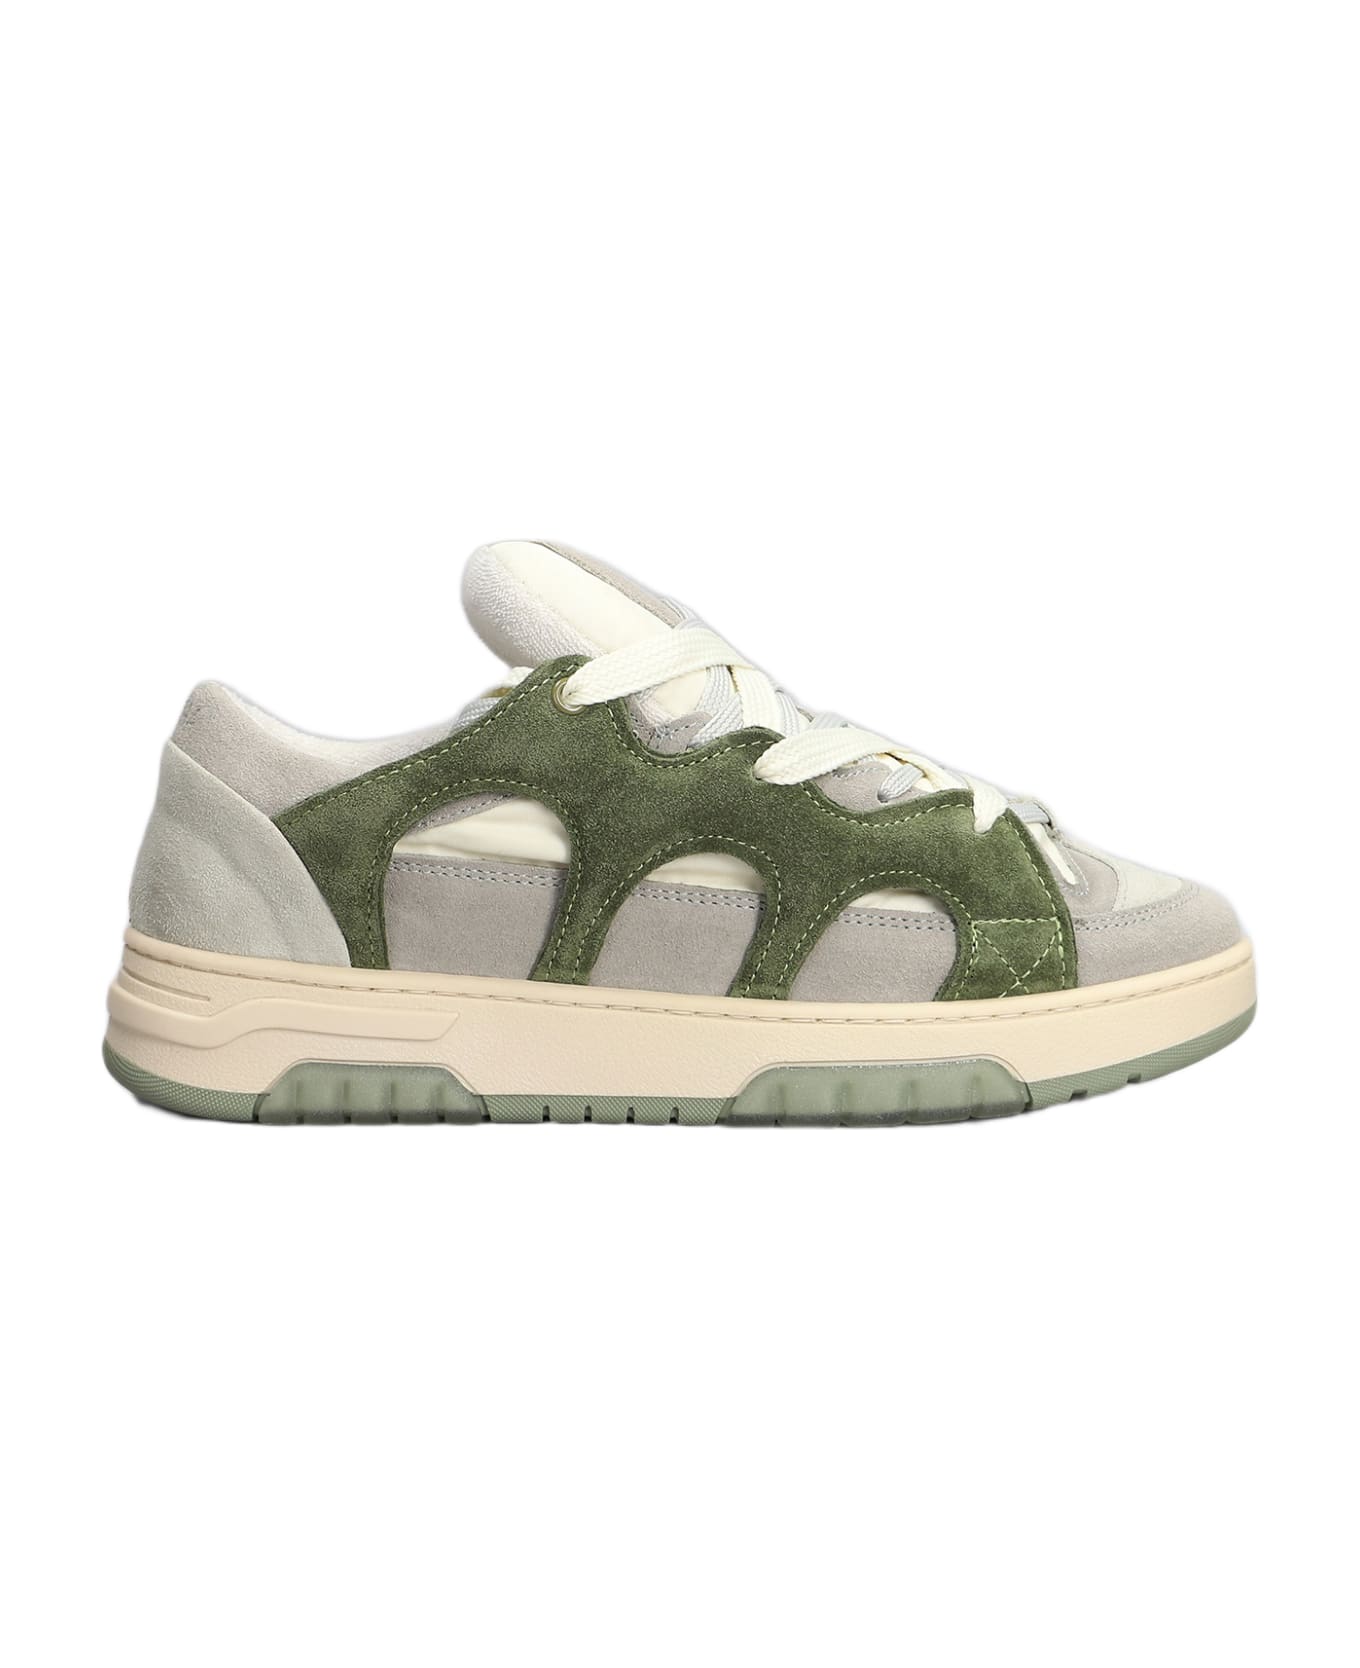 Paura Santha 1 Sneakers In Green Suede And Fabric - green